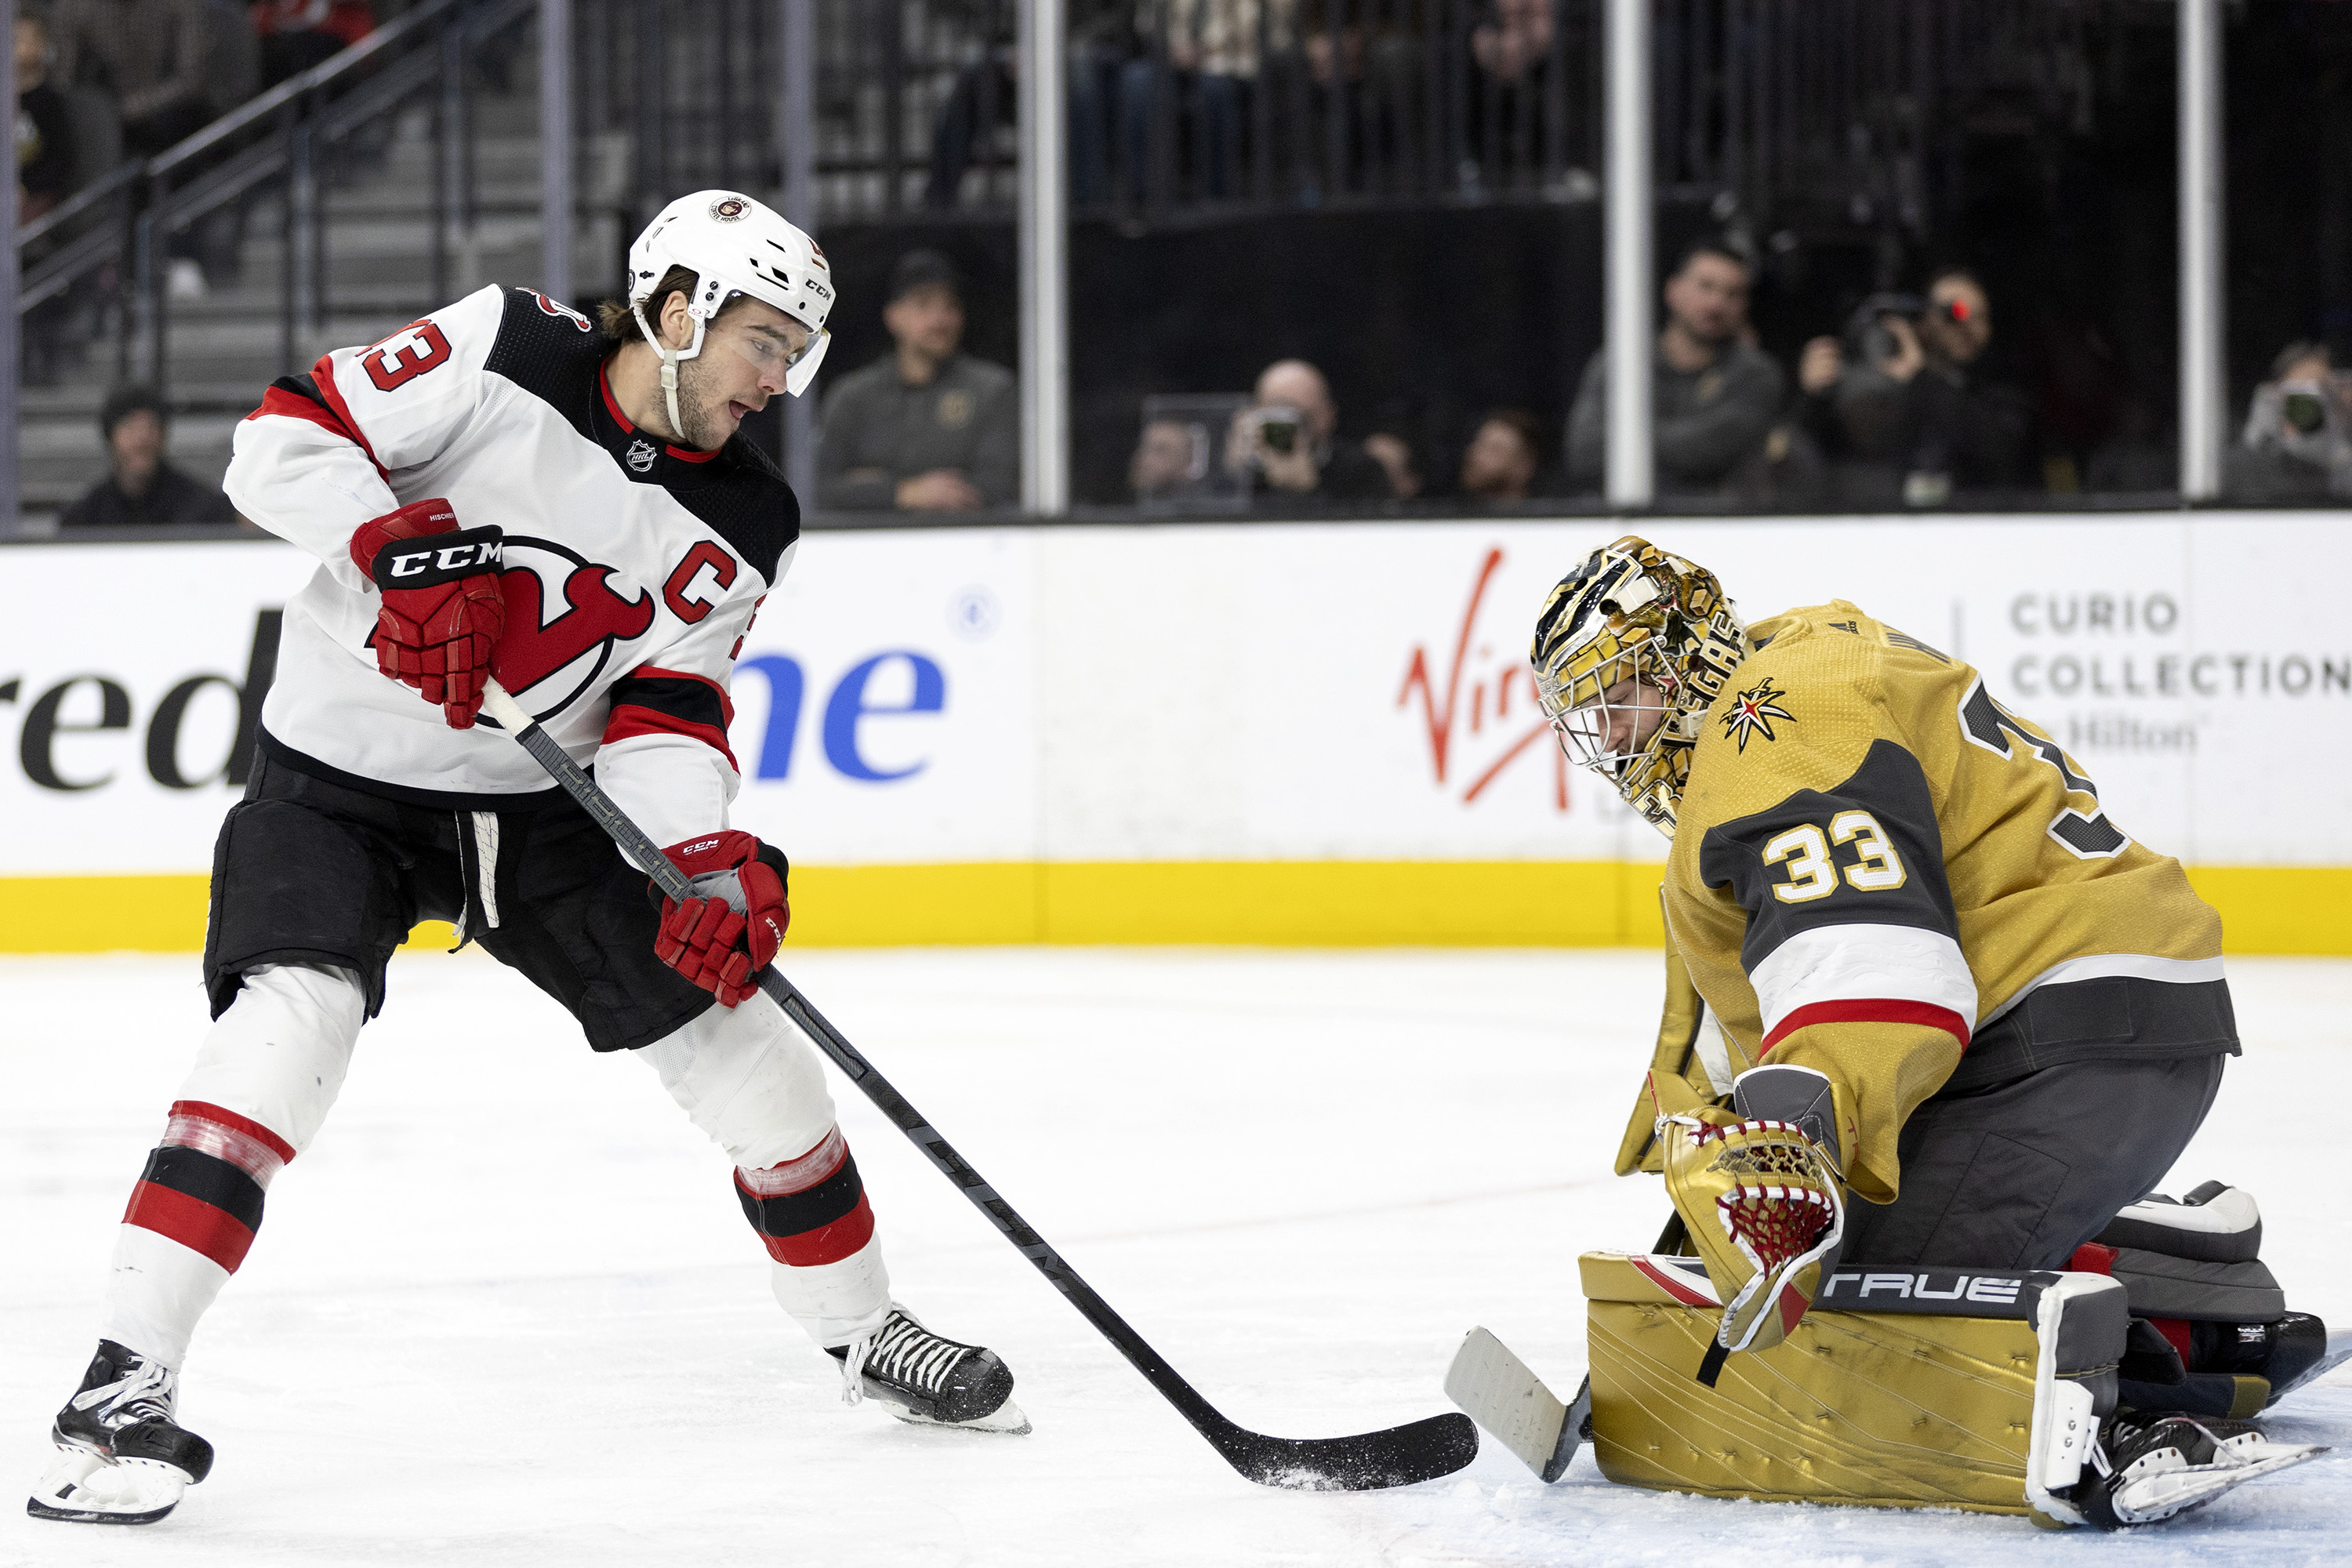 Mercer Extends Goal Streak, Sets Franchise Record with New Jersey Devils